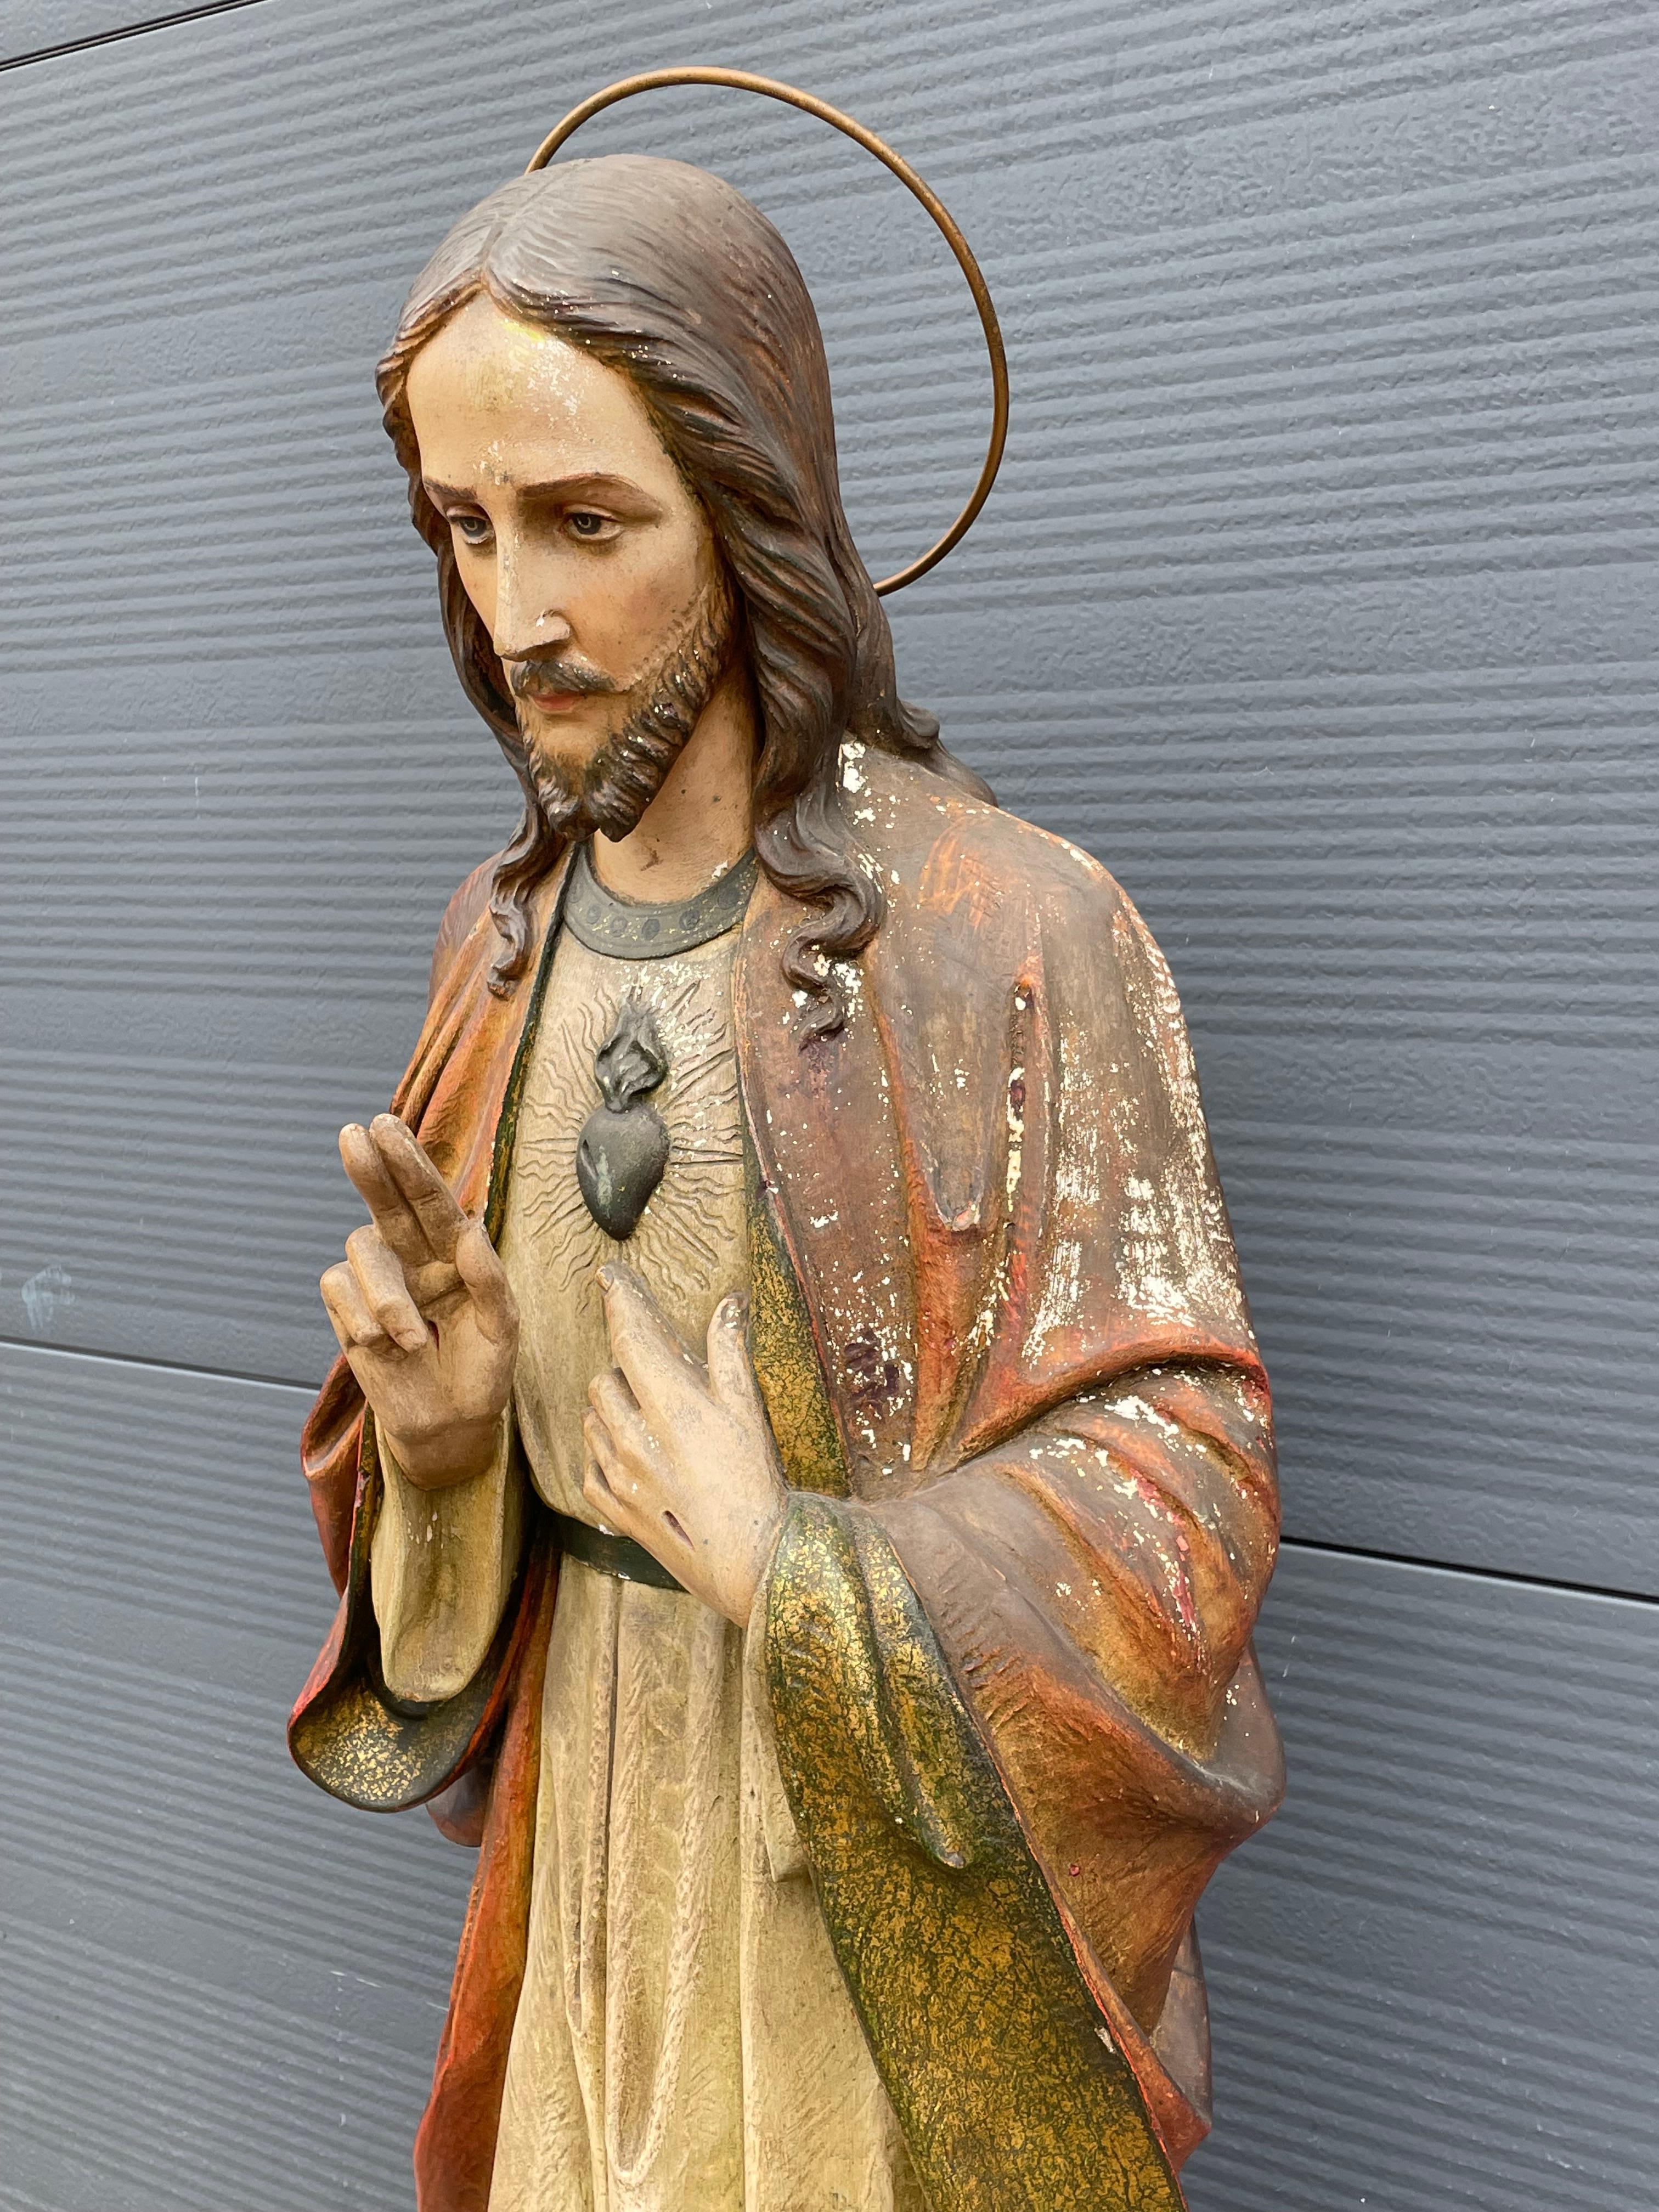 Metal Antique & Rare Hand Painted Plaster, Church Sculpture or Statue of Jesus Christ For Sale